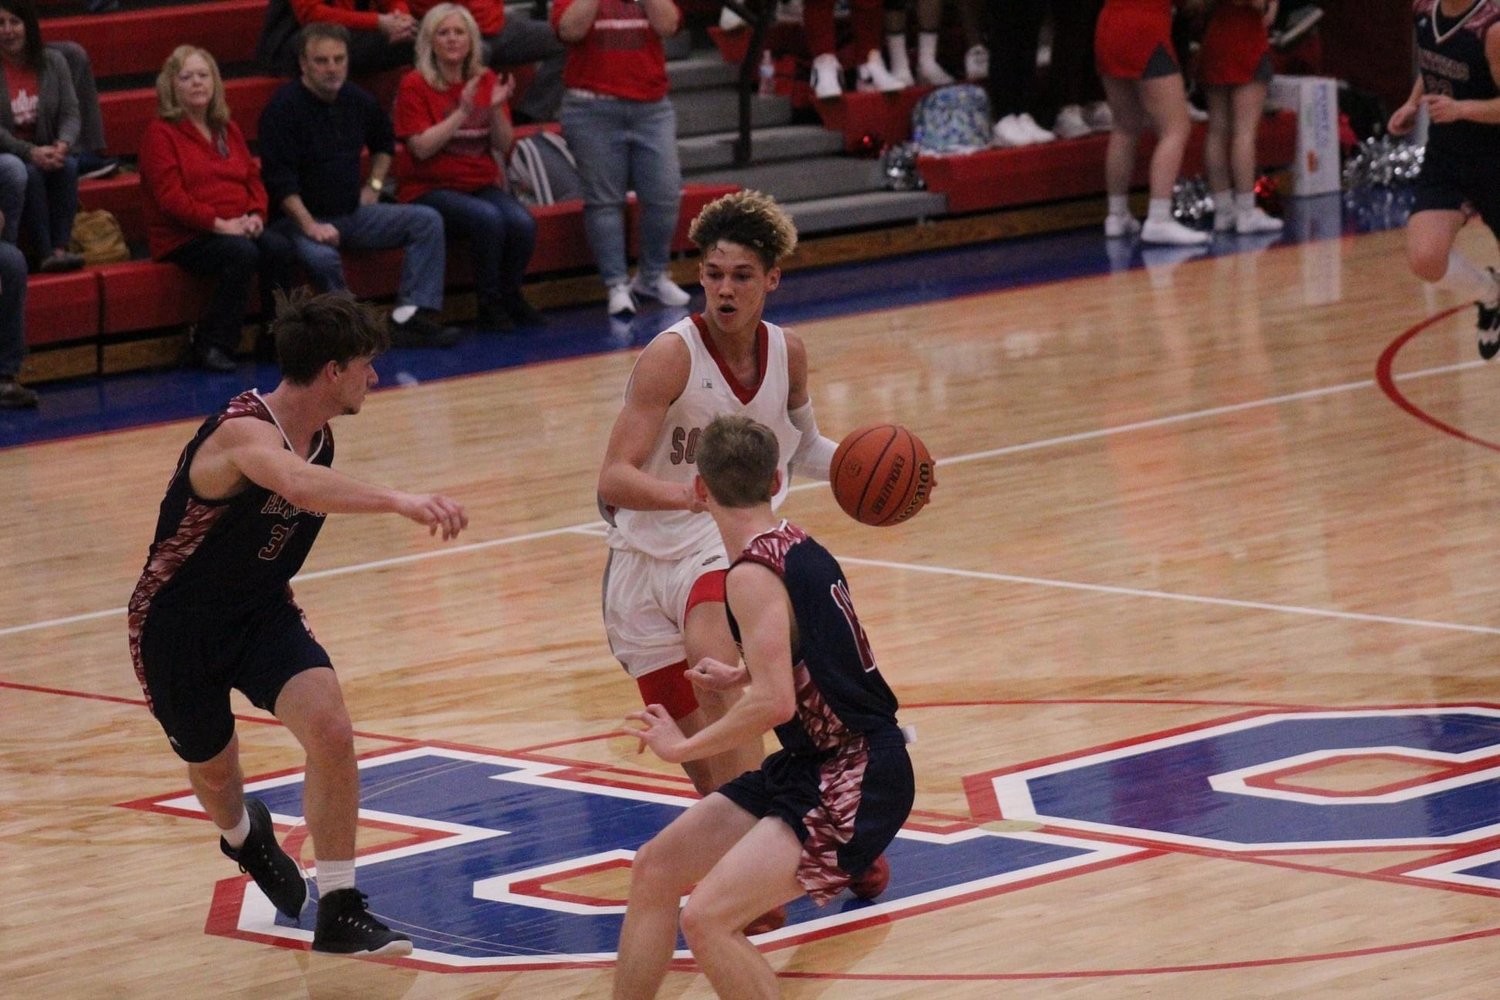 Avery Saunders continues to be a rock-solid presence for Southmont and led the Mounties with 22 pts in their dominating 67-23 victory over Riverton Parke in their sectional opener.